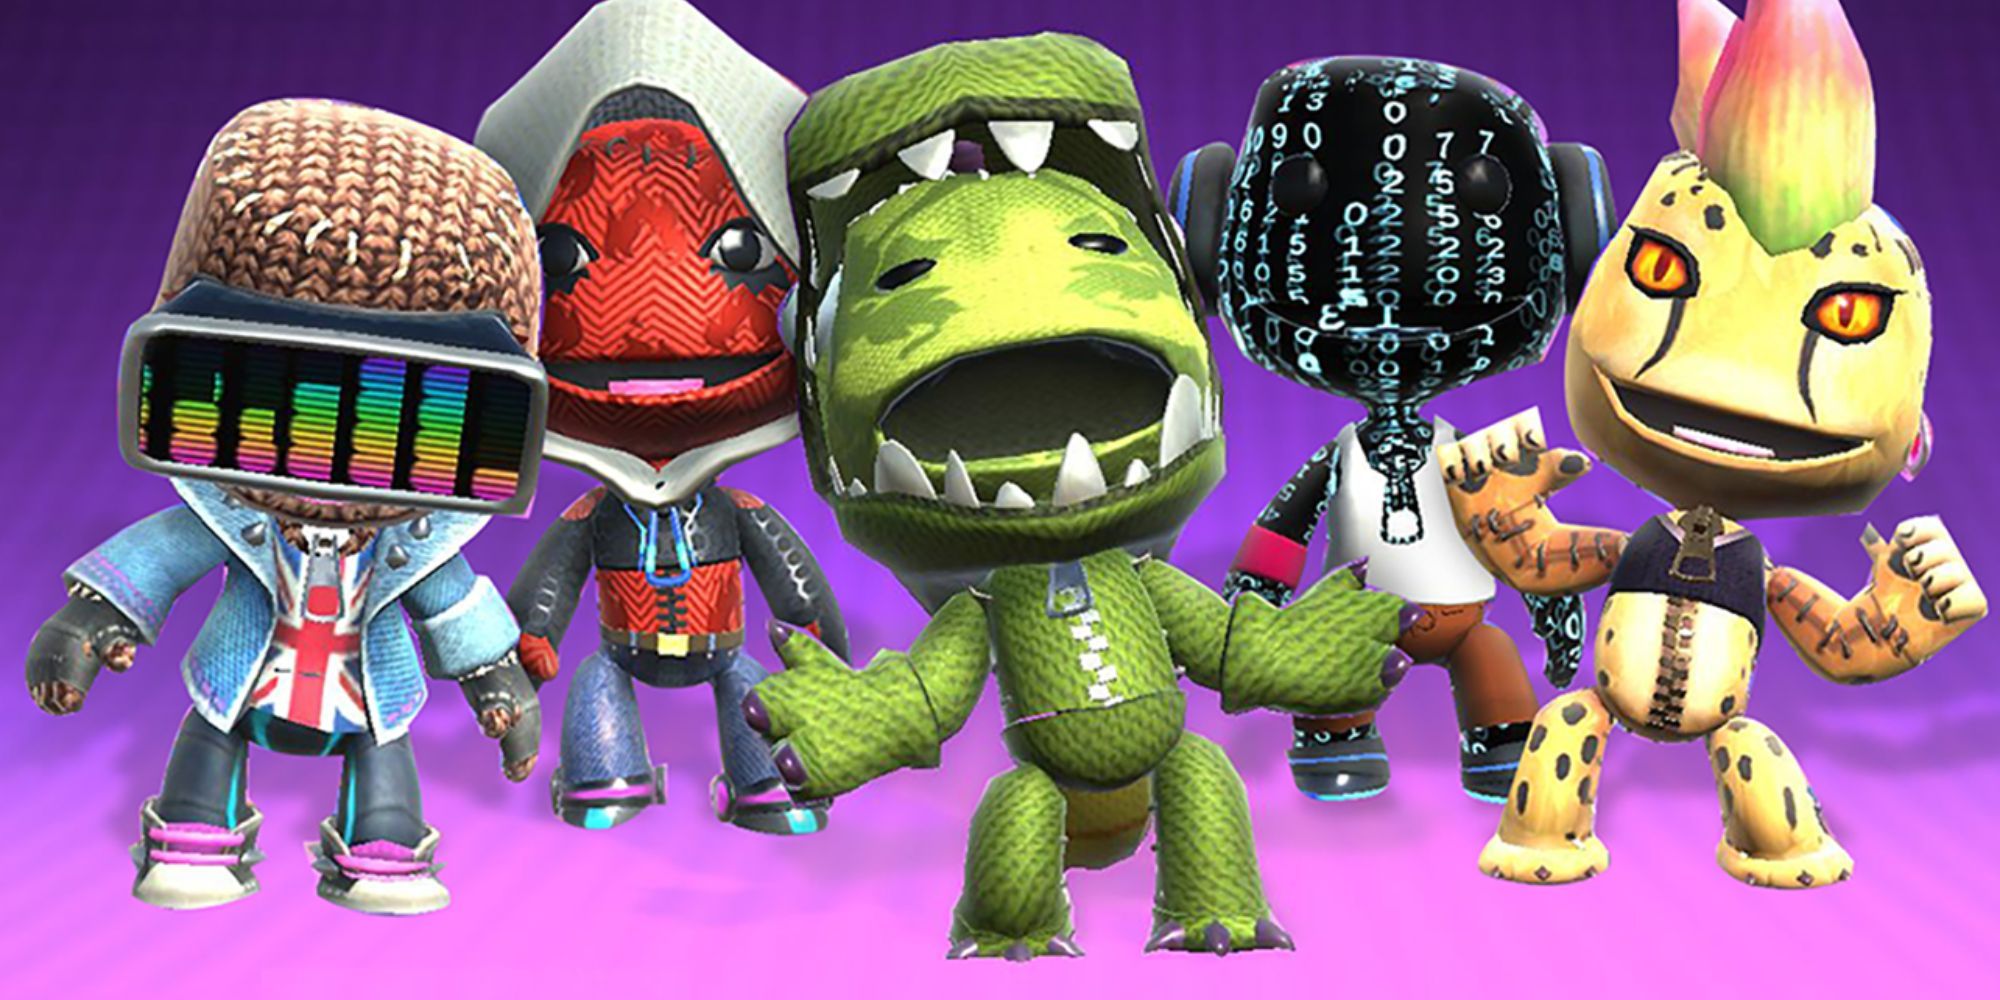 An image showing a variety of Sackboys including punk ones, British one, Matrix-y one